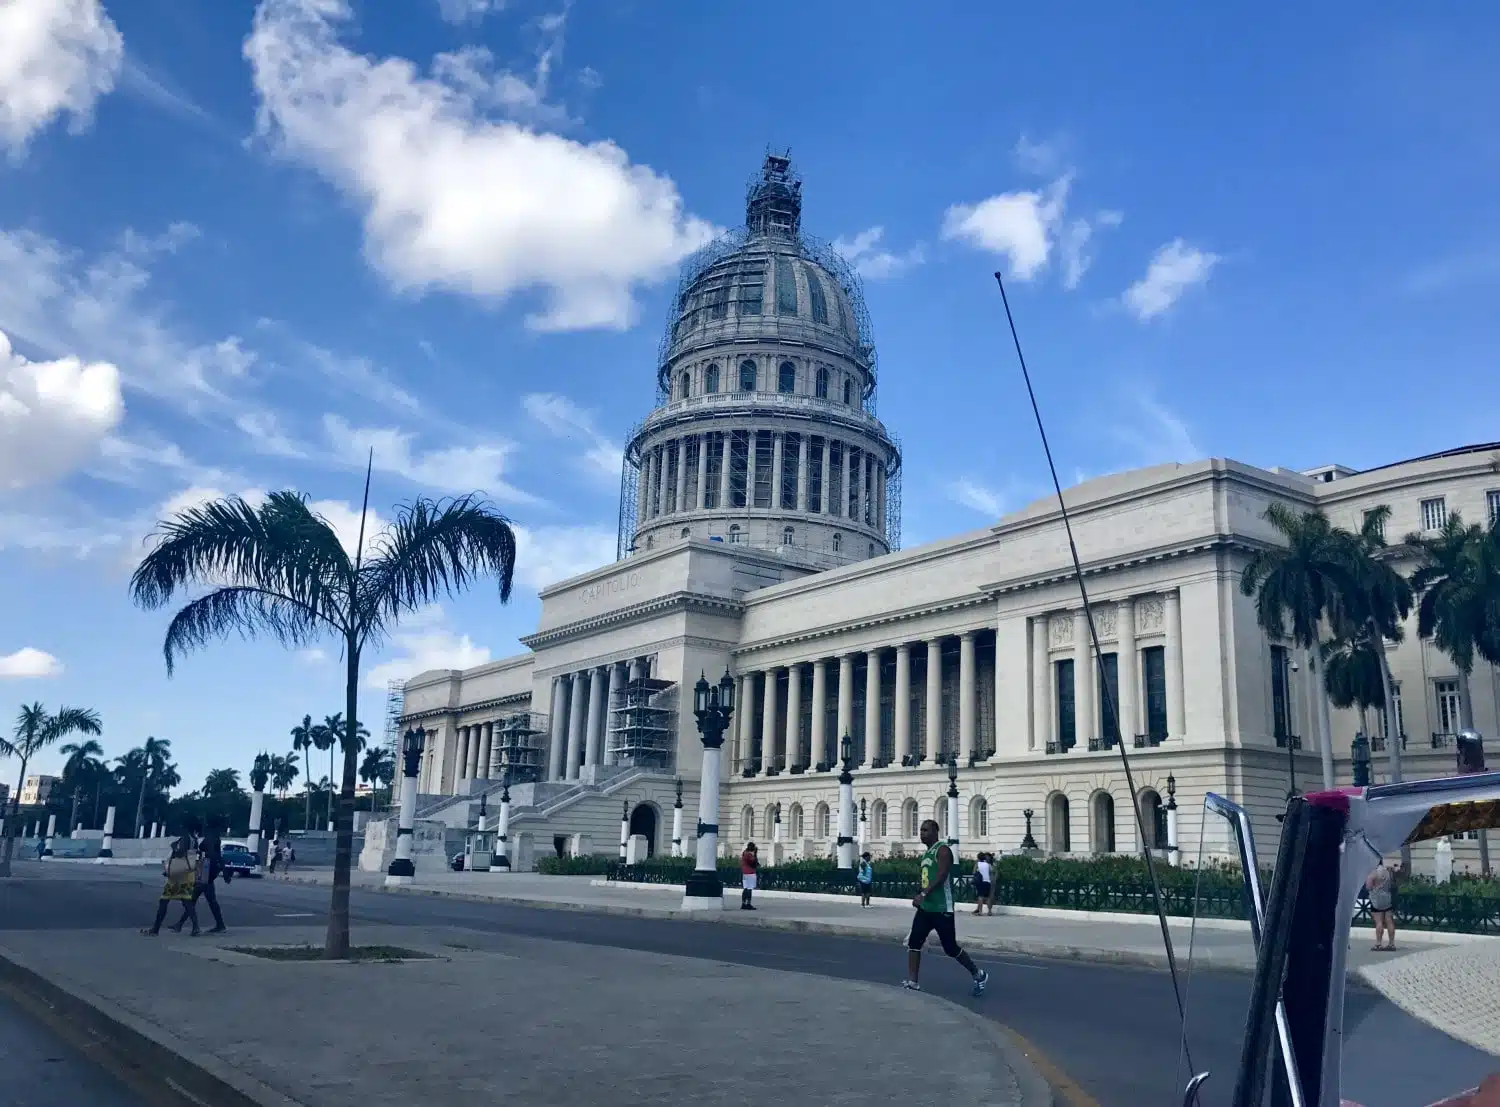 El Capitol, Havana should be on the top of your itinerary when visiting the city. Here's why